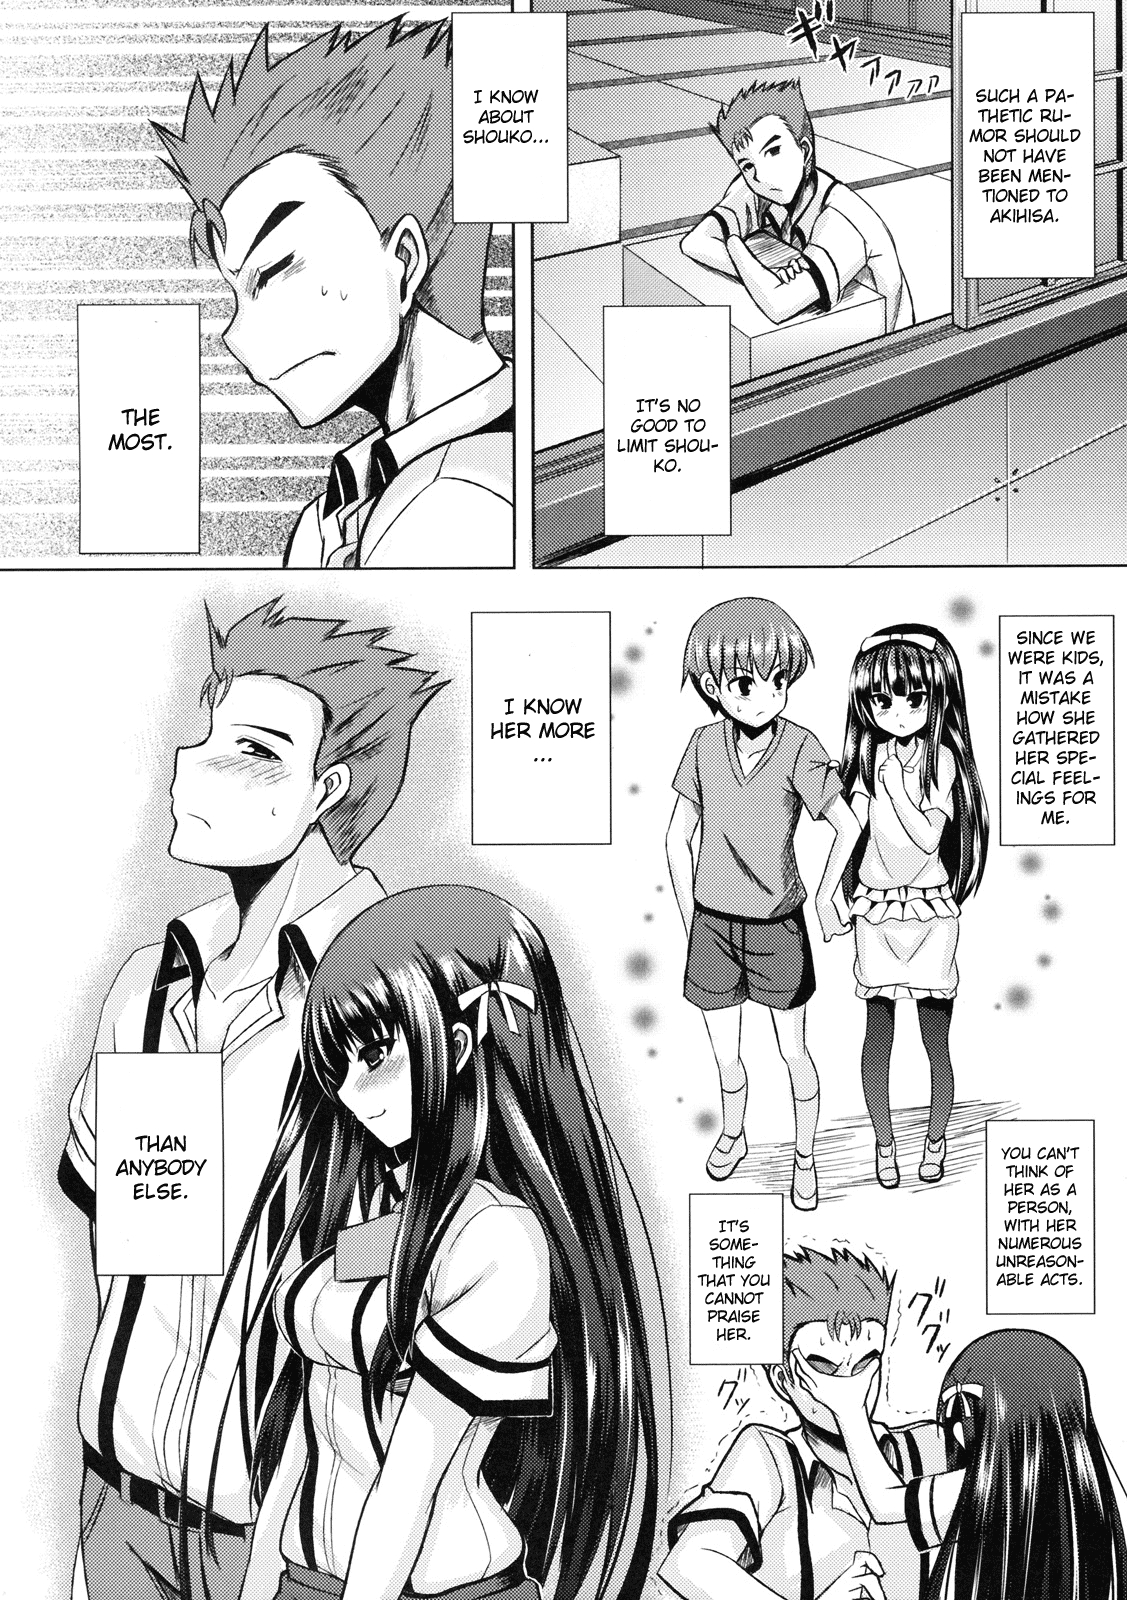 (COMIC1☆4) [PTD (Tatsuhiko)] Iron finger from hell (Baka to Test to Shoukanju) [English] [One of a Kind Productions] 4